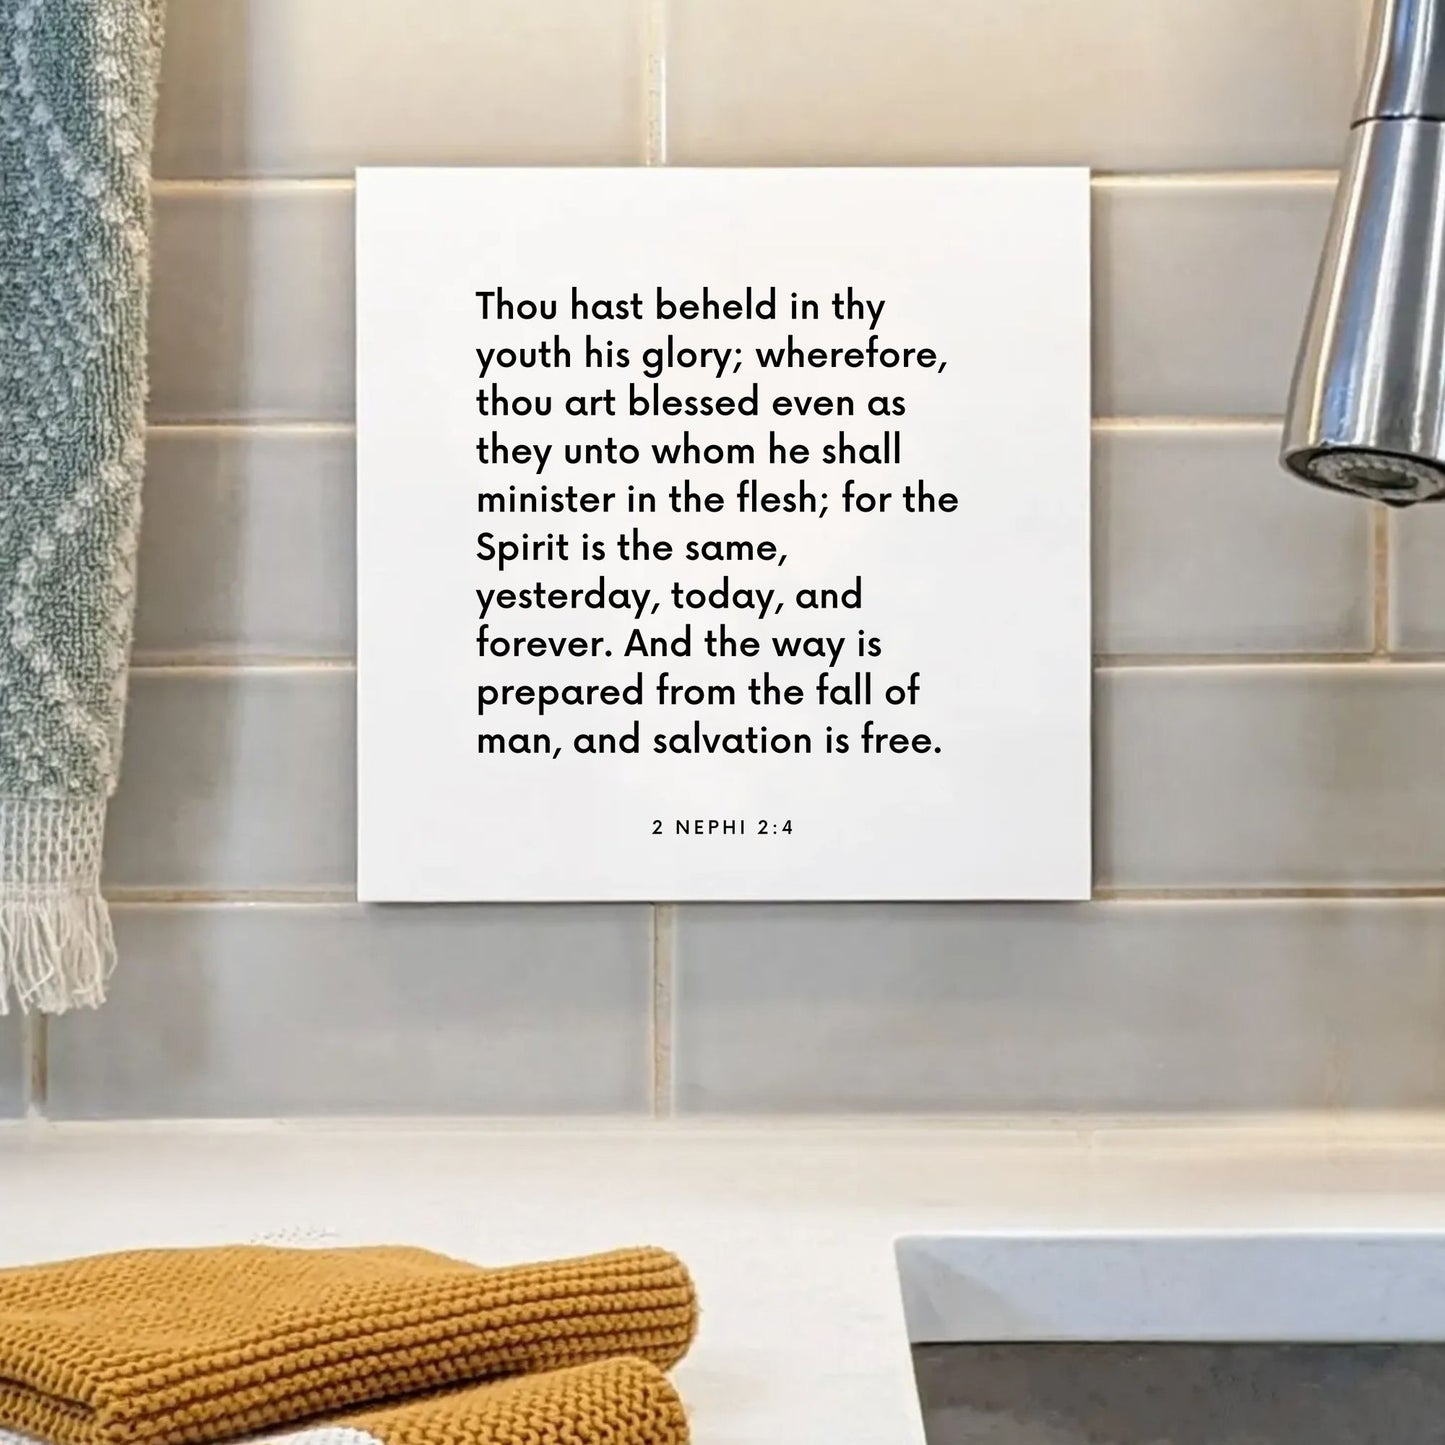 Sink mouting of the scripture tile for 2 Nephi 2:4 - "The way is prepared from the fall of man"